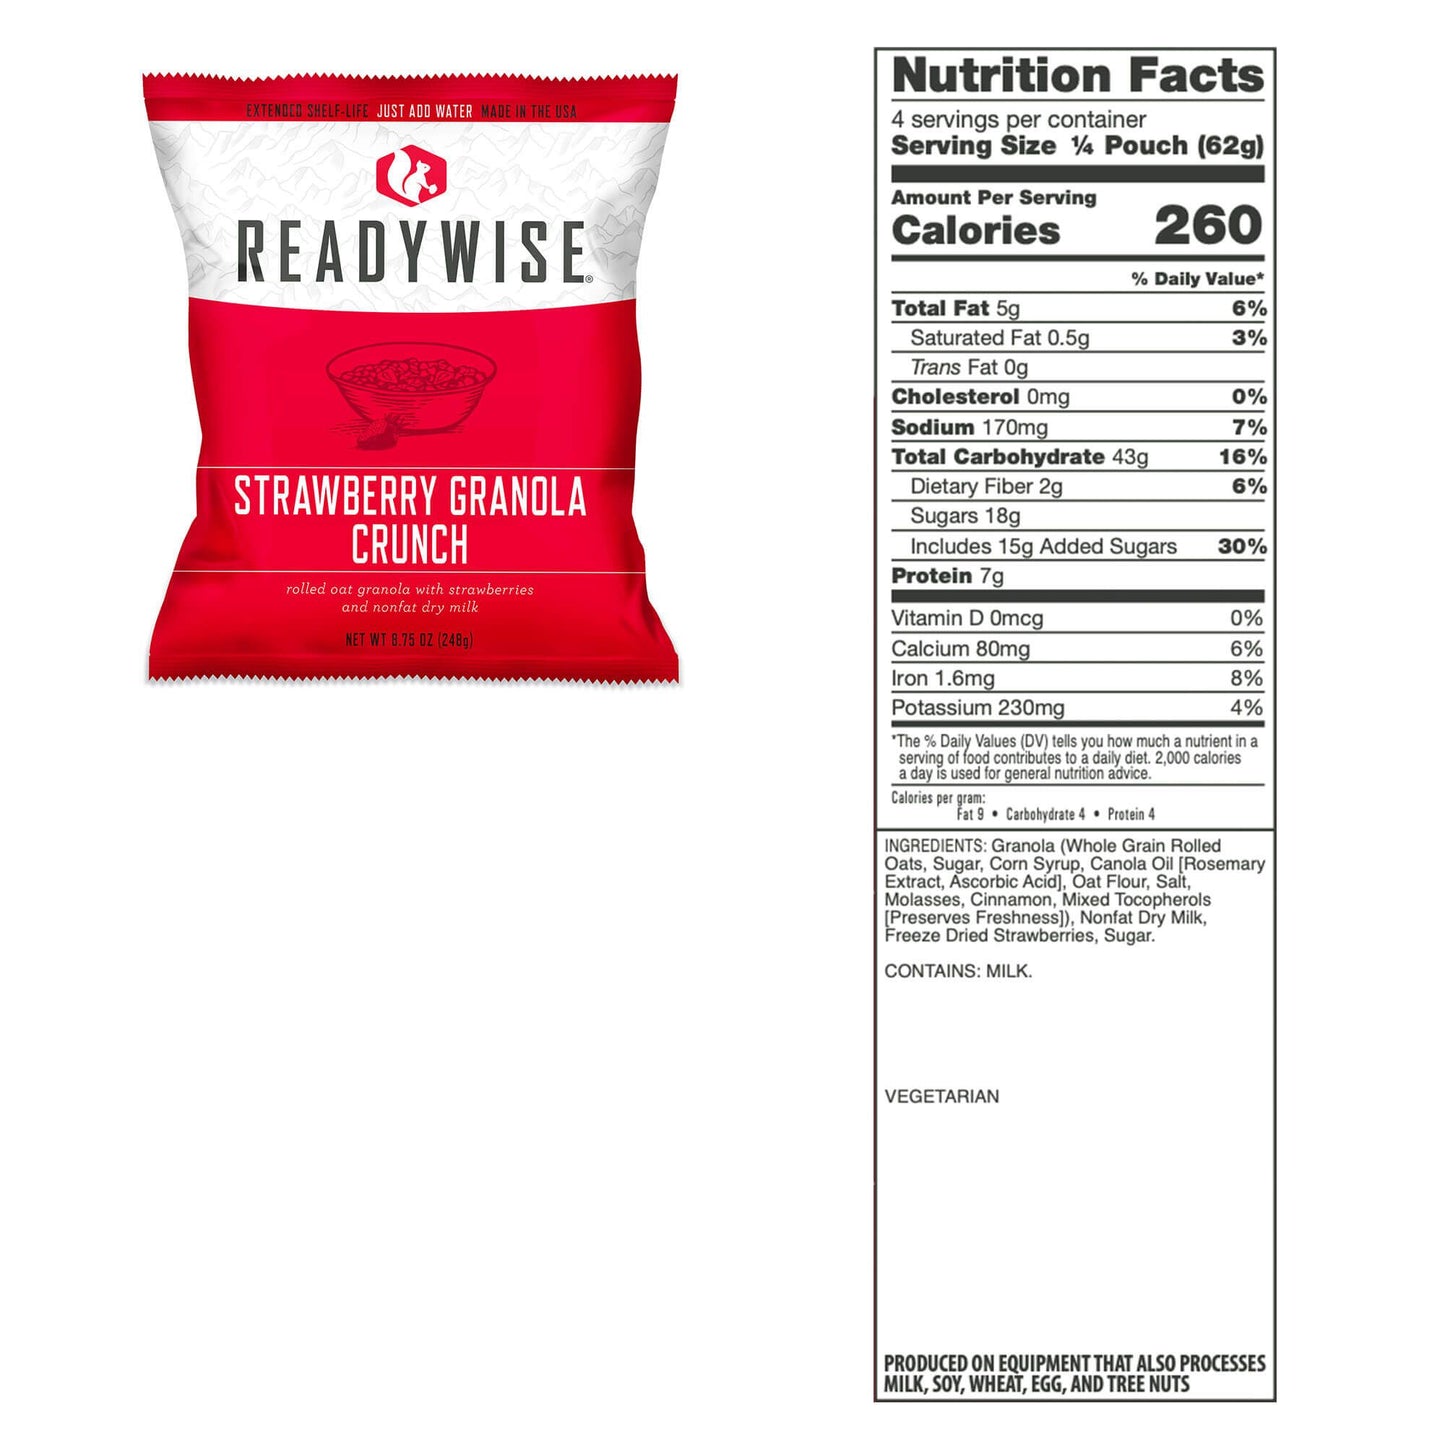 Strawberry Granola Crunch packet with nutritional information